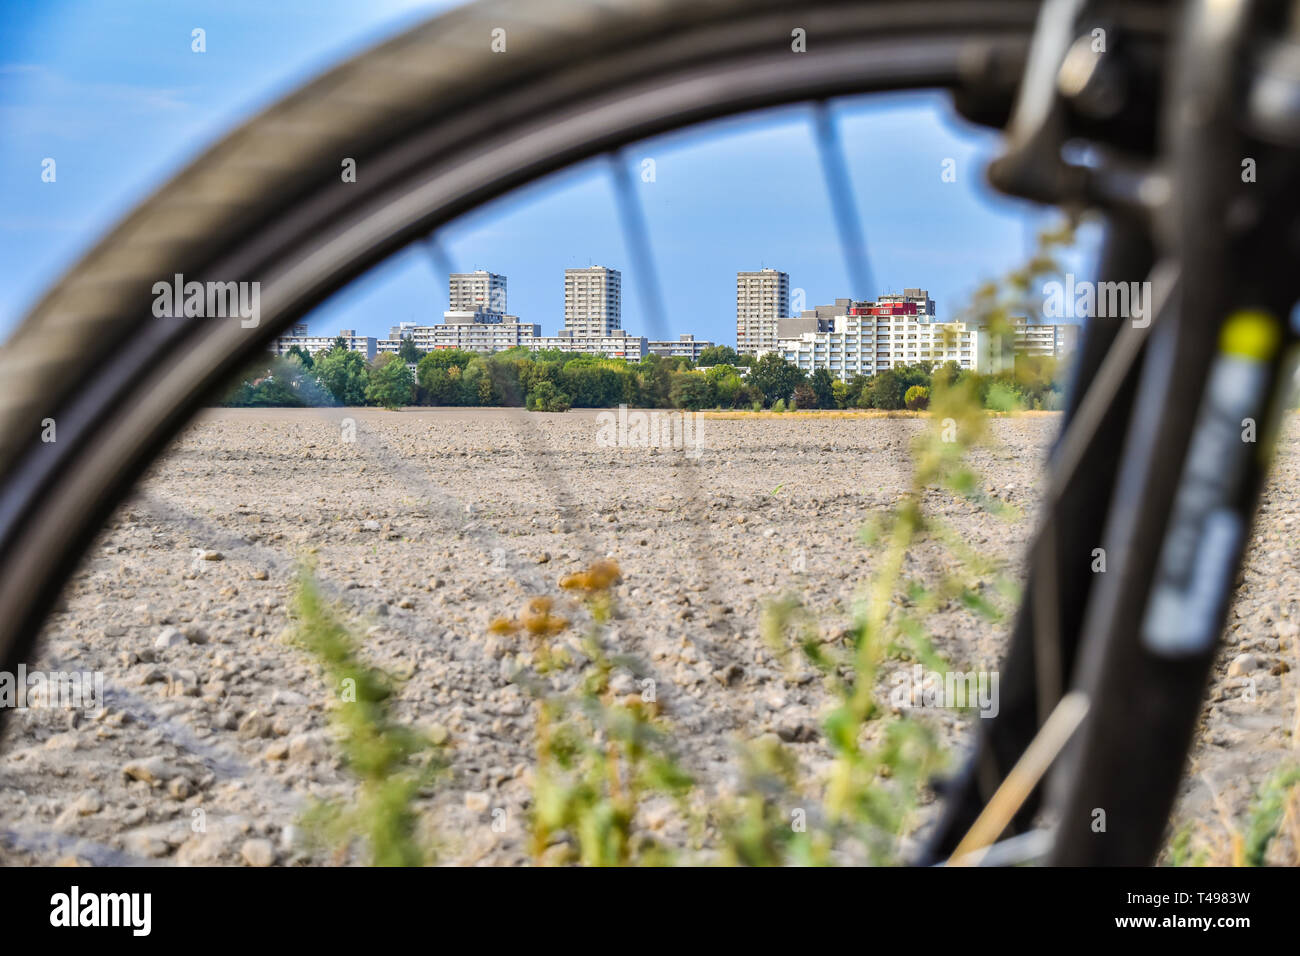 View through the unfocused front wheel of a bicycle across a field to the satellite town of Gropiusstadt in Berlin-Neukölln. Stock Photo